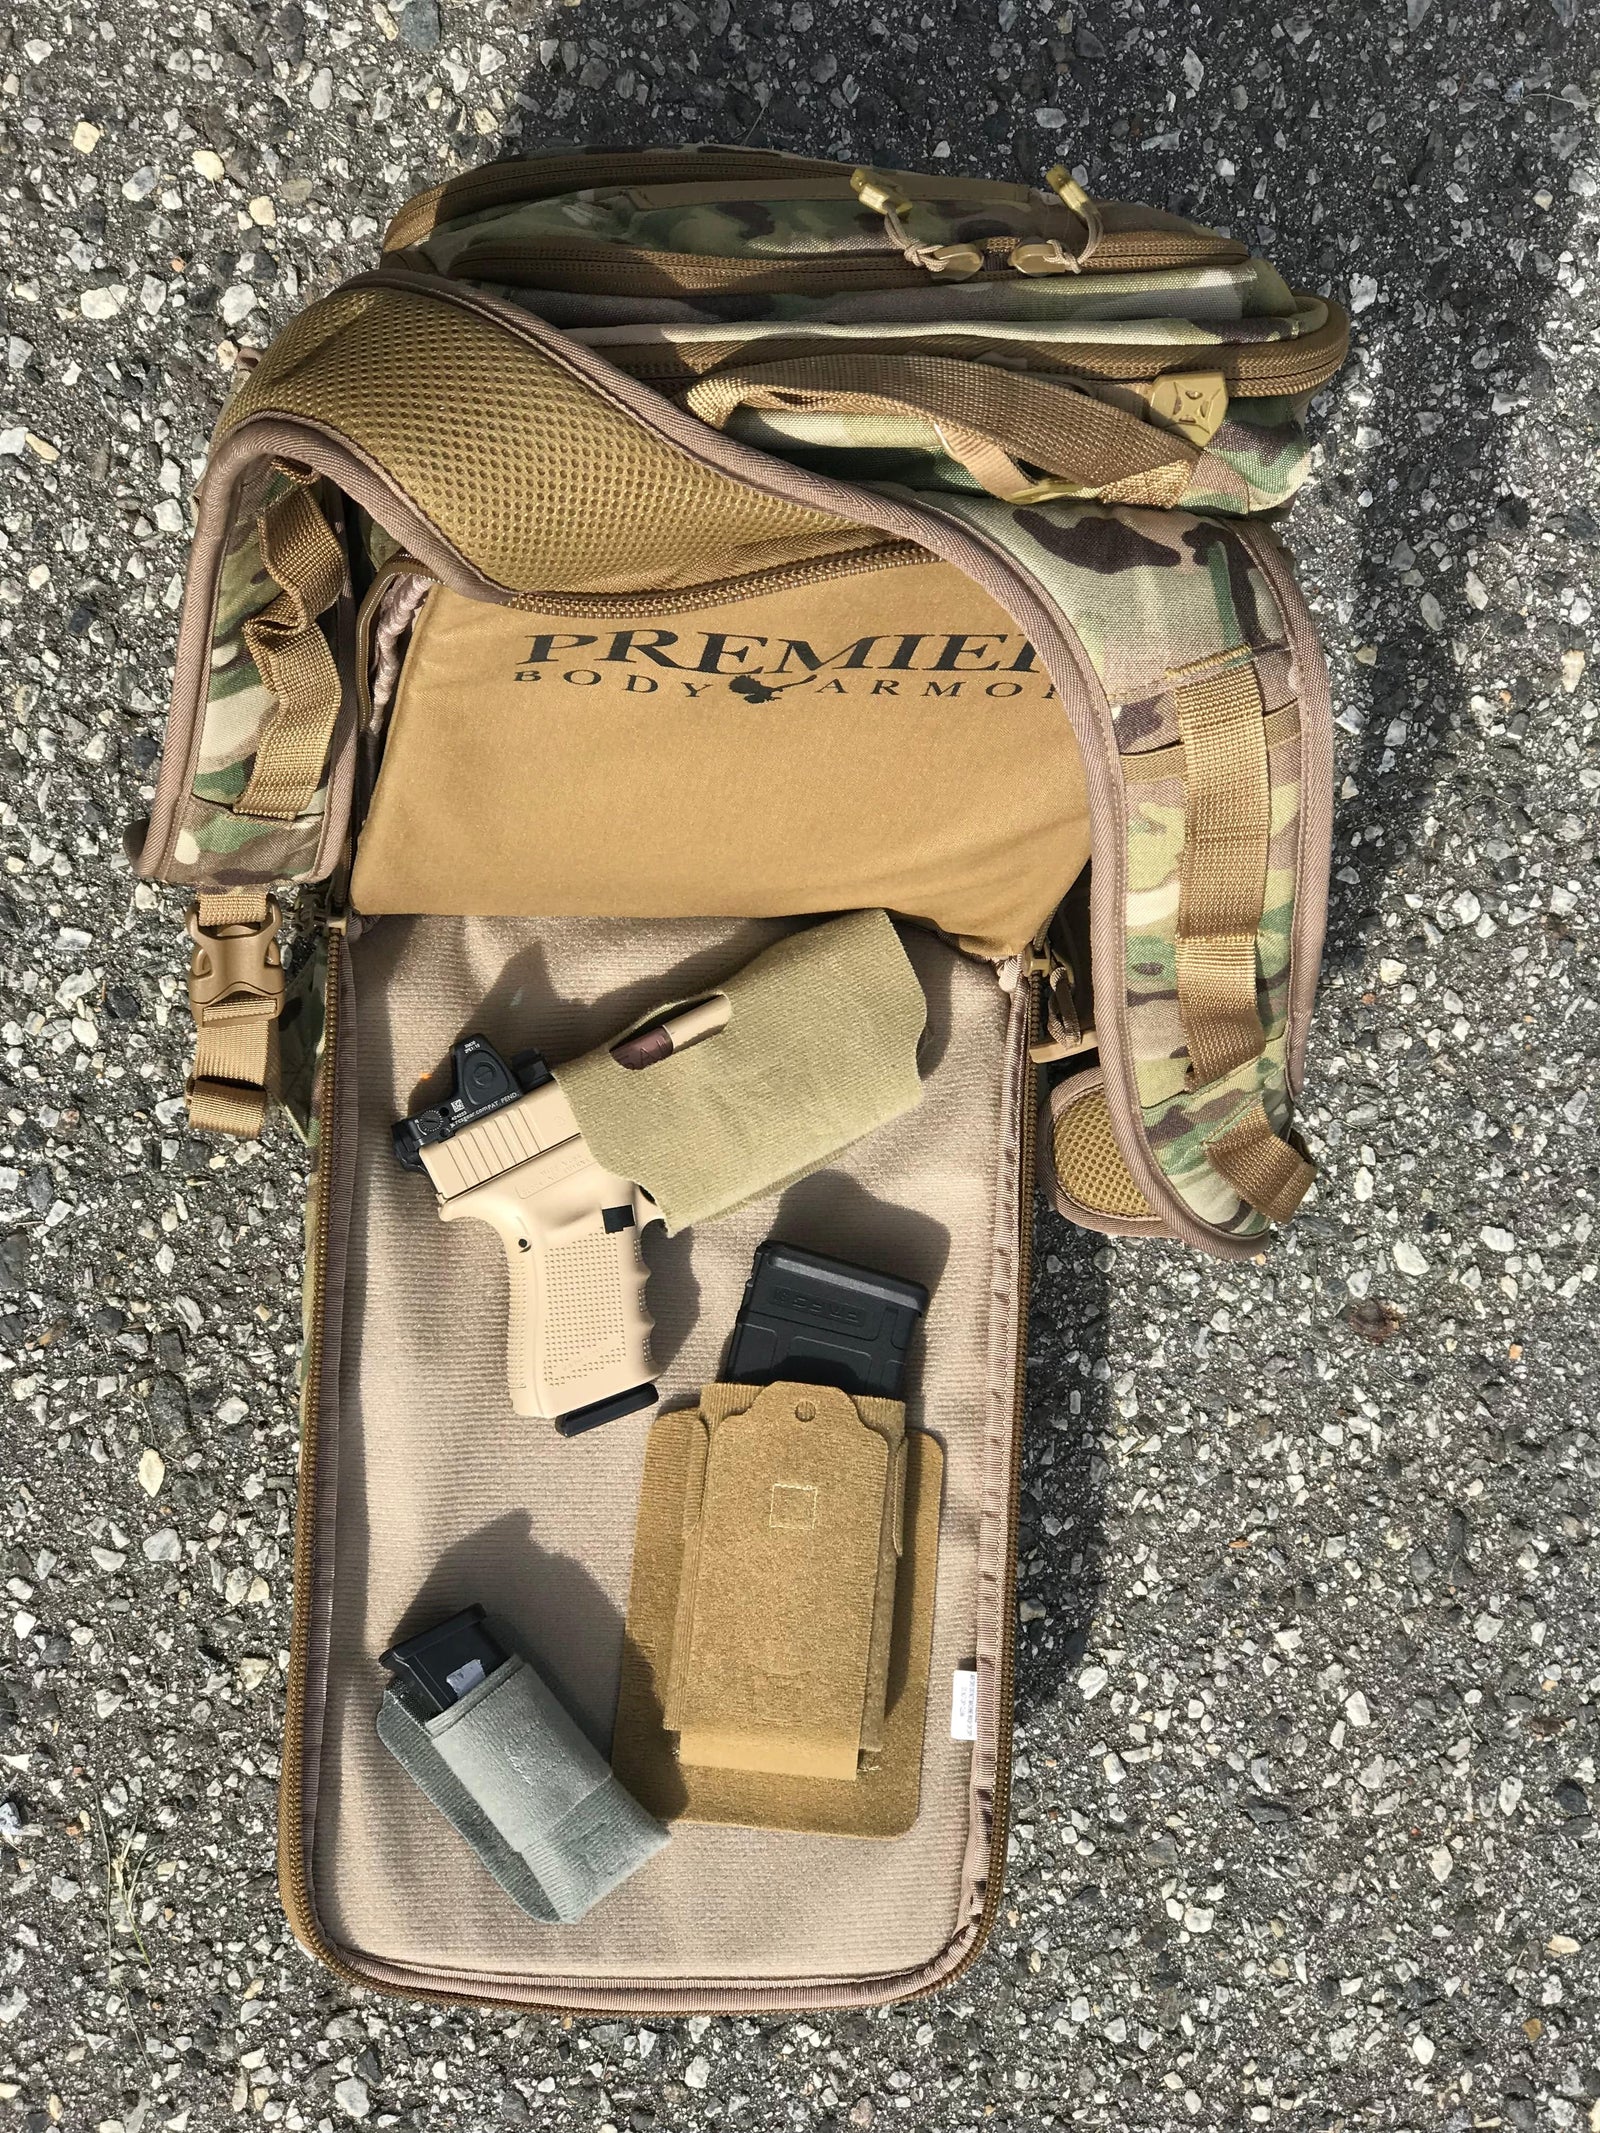 Accessories - WTT plate carrier setup for TL3 SA